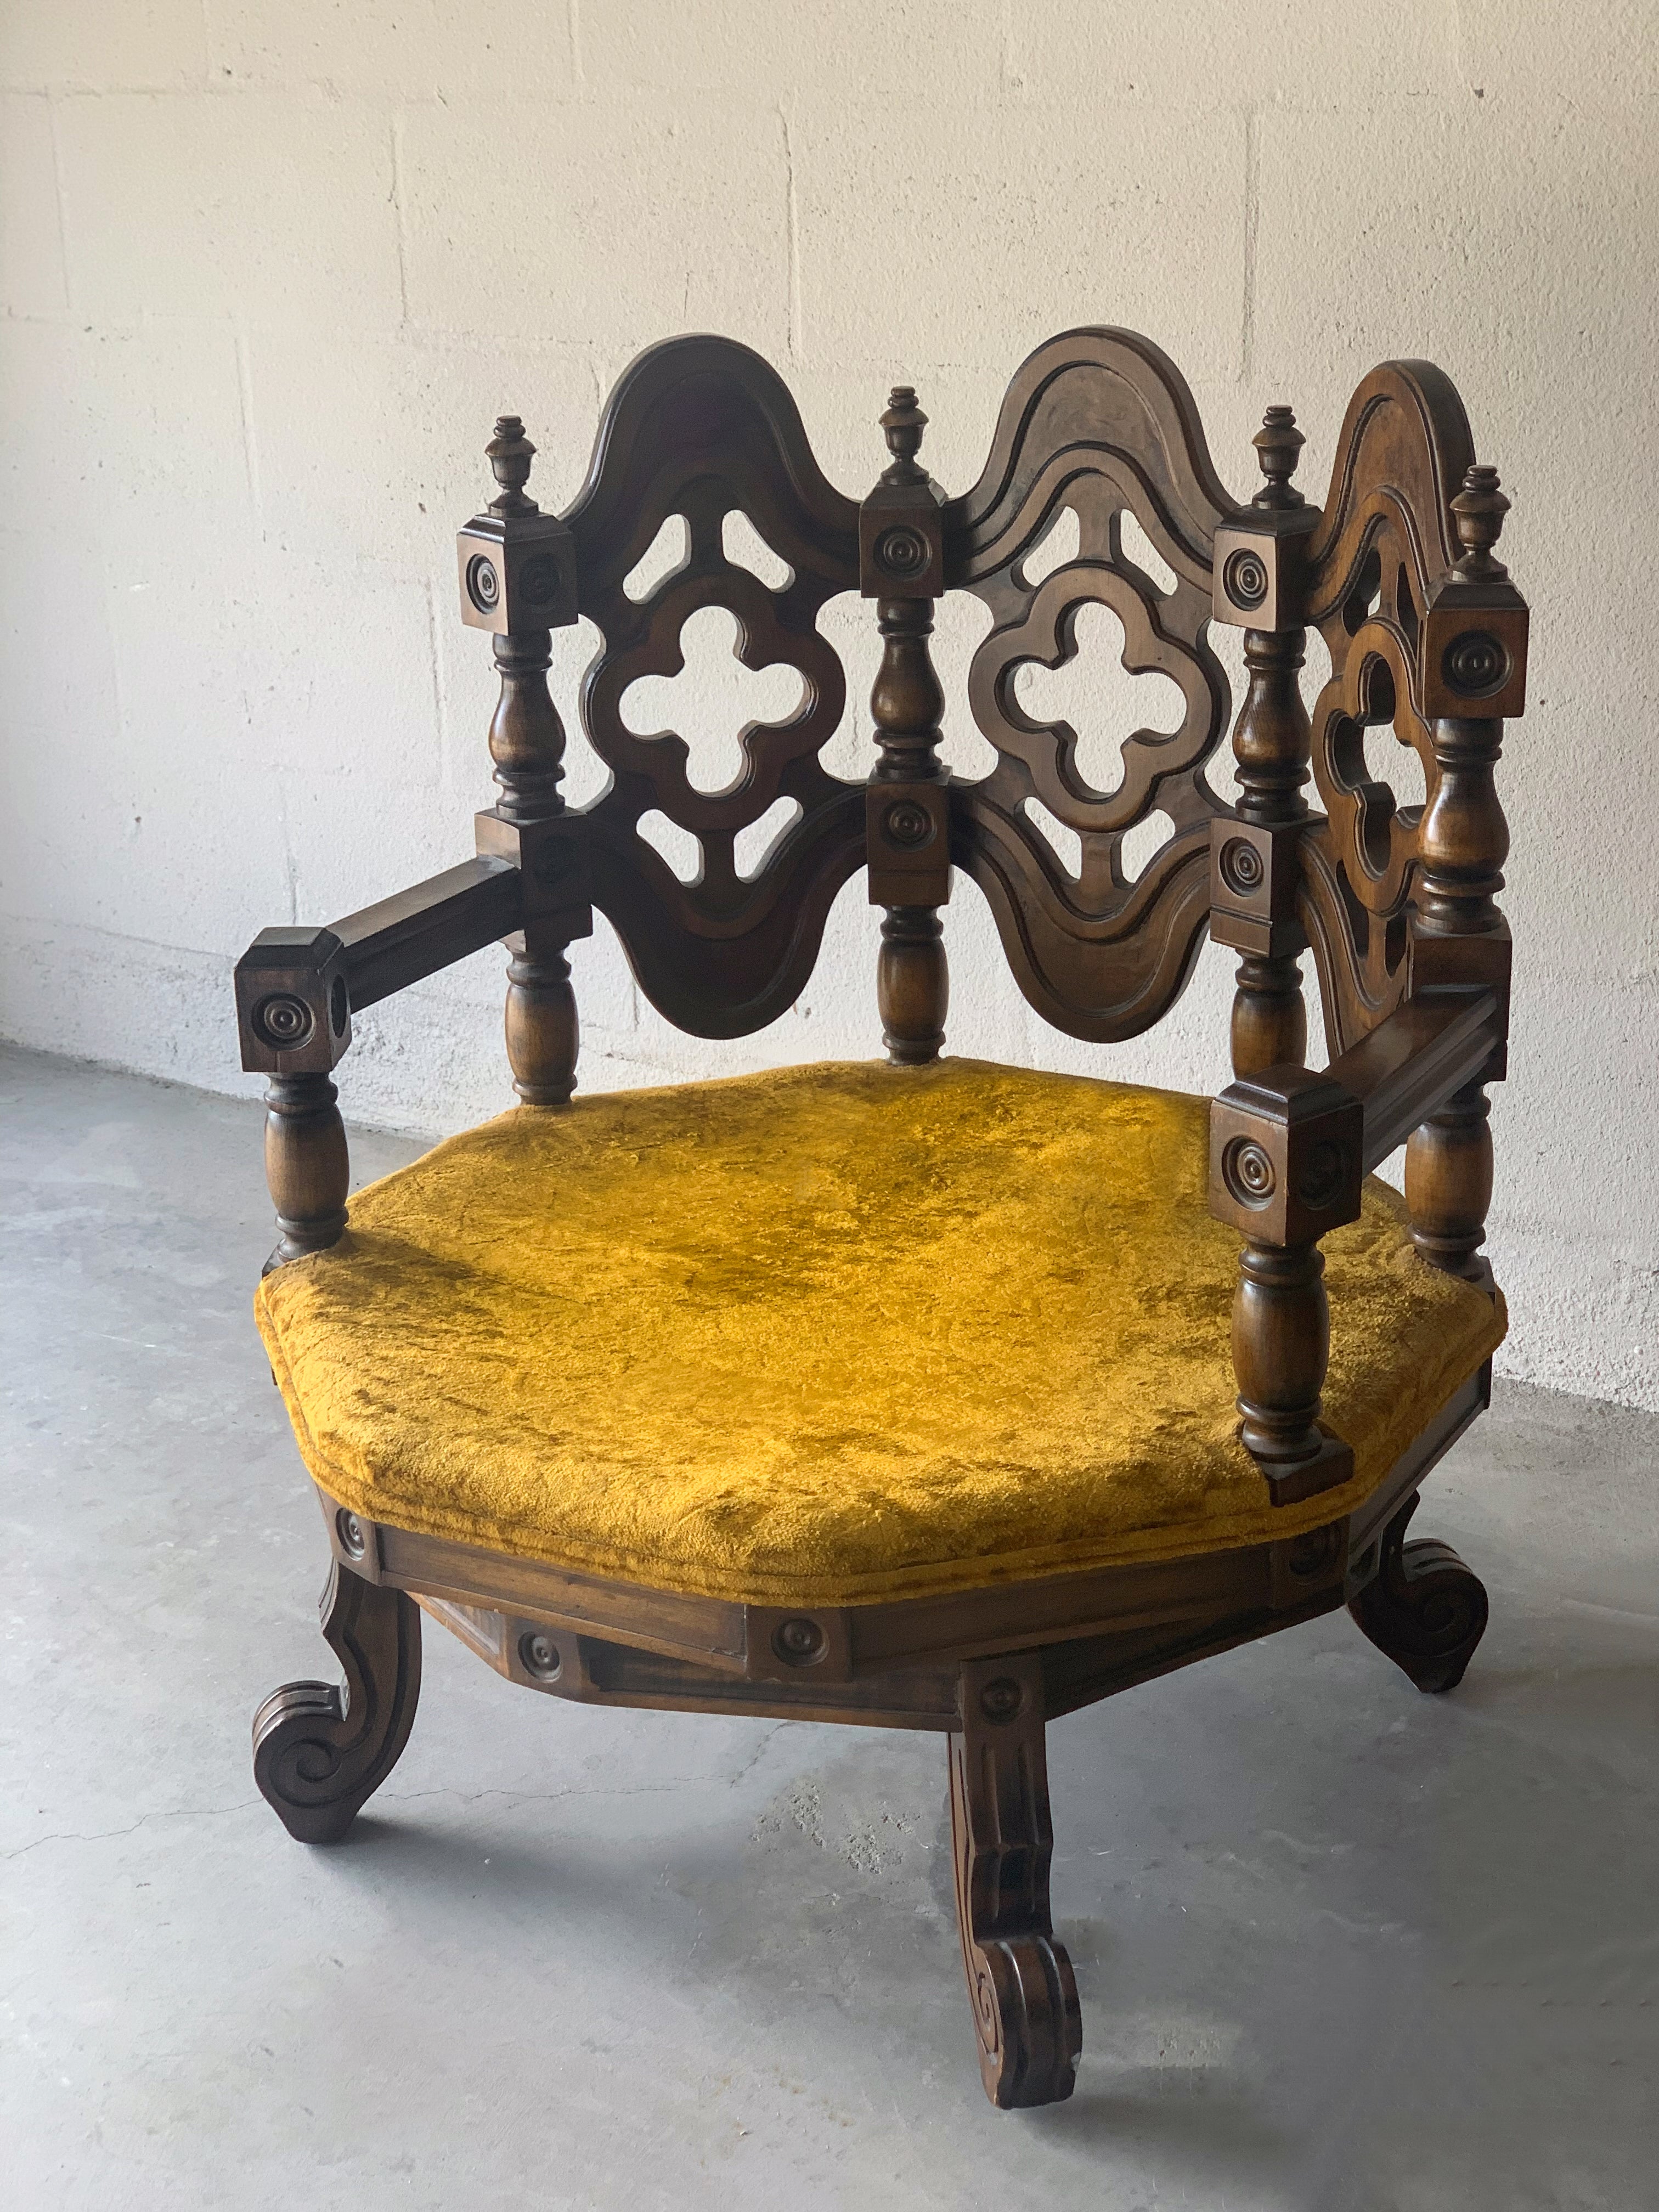 An intricately carved swivel chair from the 20th c. Base rotates a full 360 degrees. Chair is highlighted by a sculptural back, hand-crafted in gothic motifs. Crushed velvet upholstery is original to the chair and are removable. Chair makes a